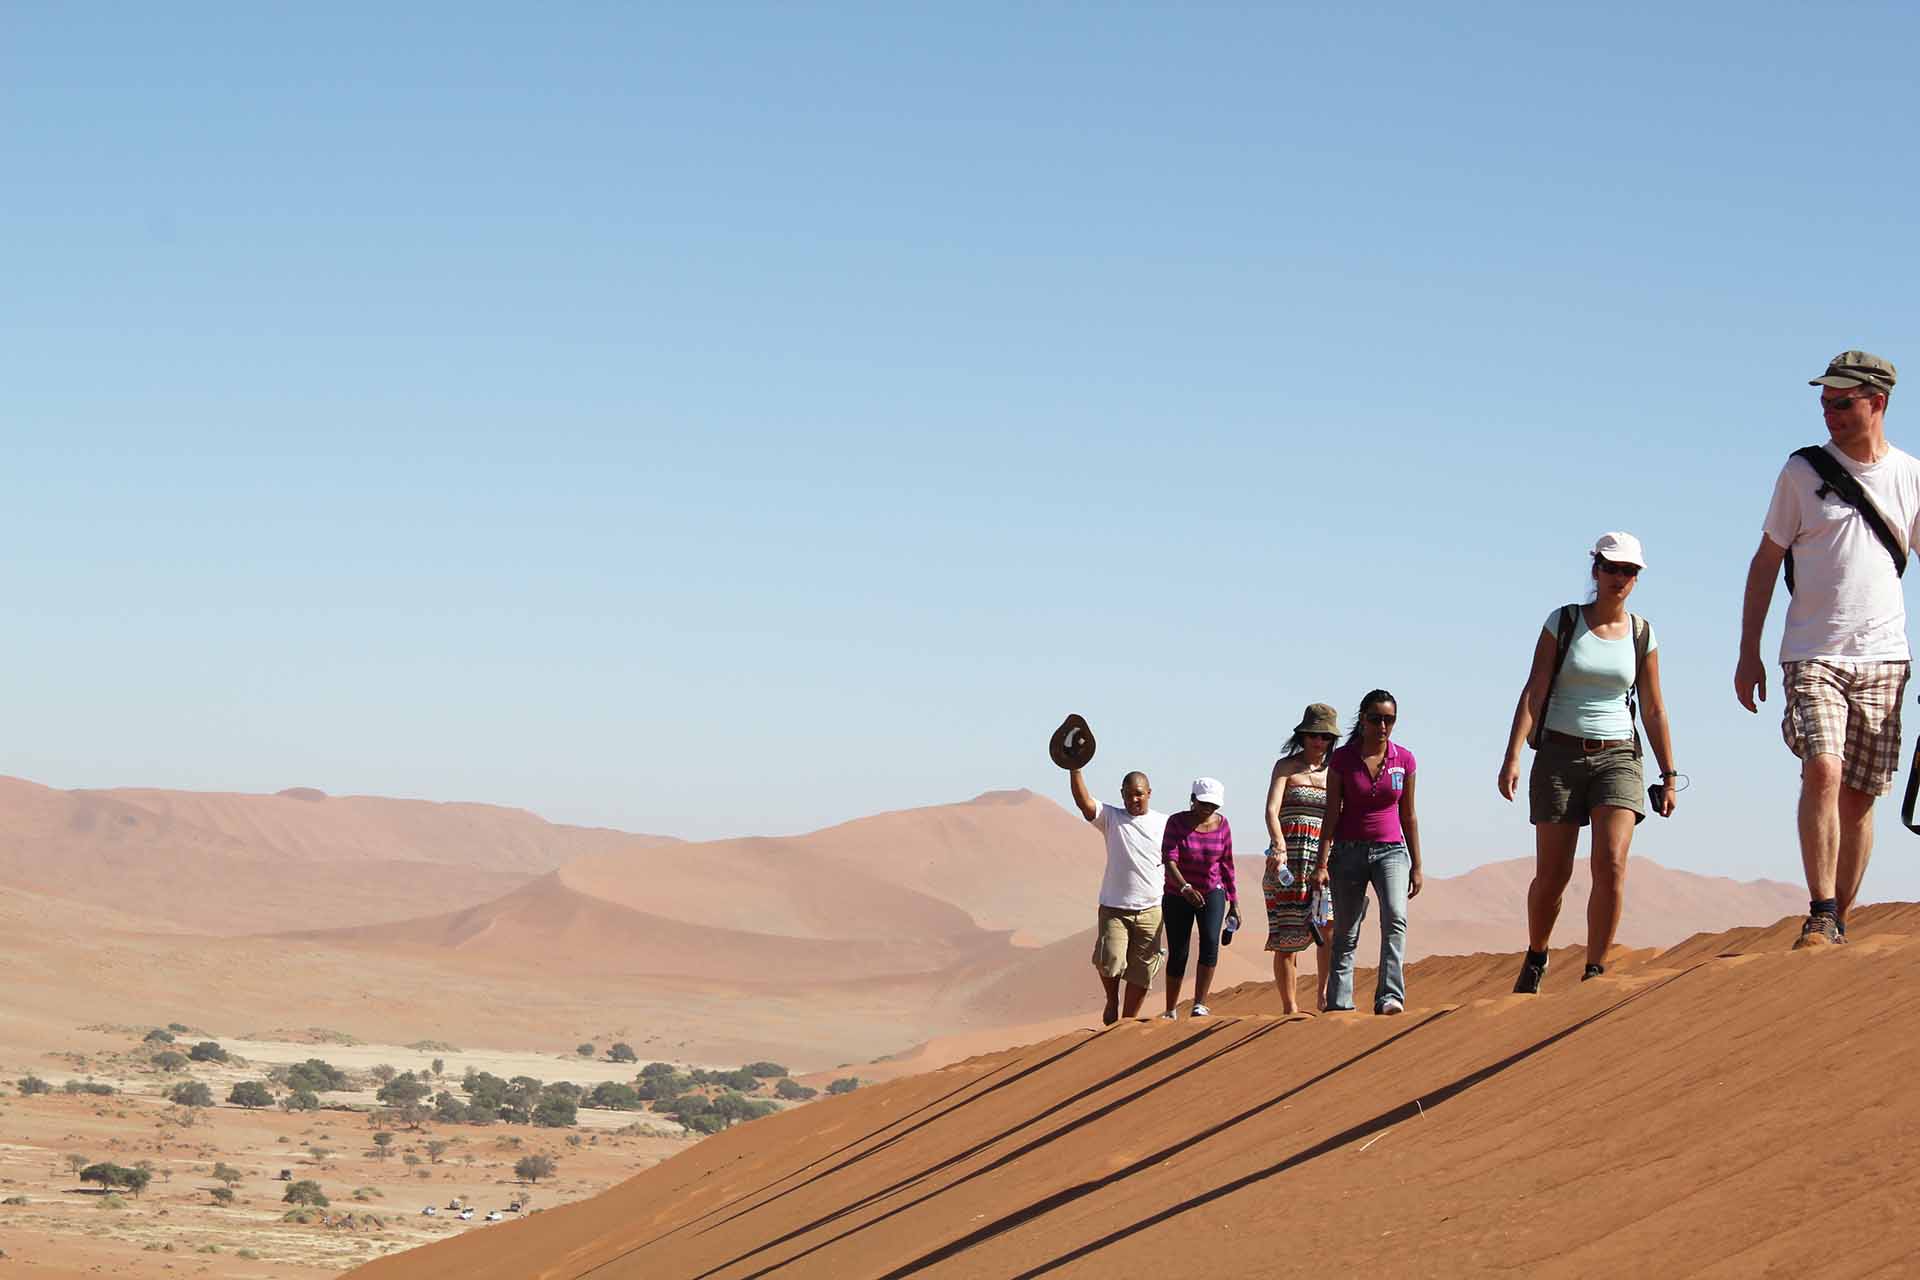 Tourists hiking uphill on the famous sand dunes in the Namib-Naukluft park area in Namibia